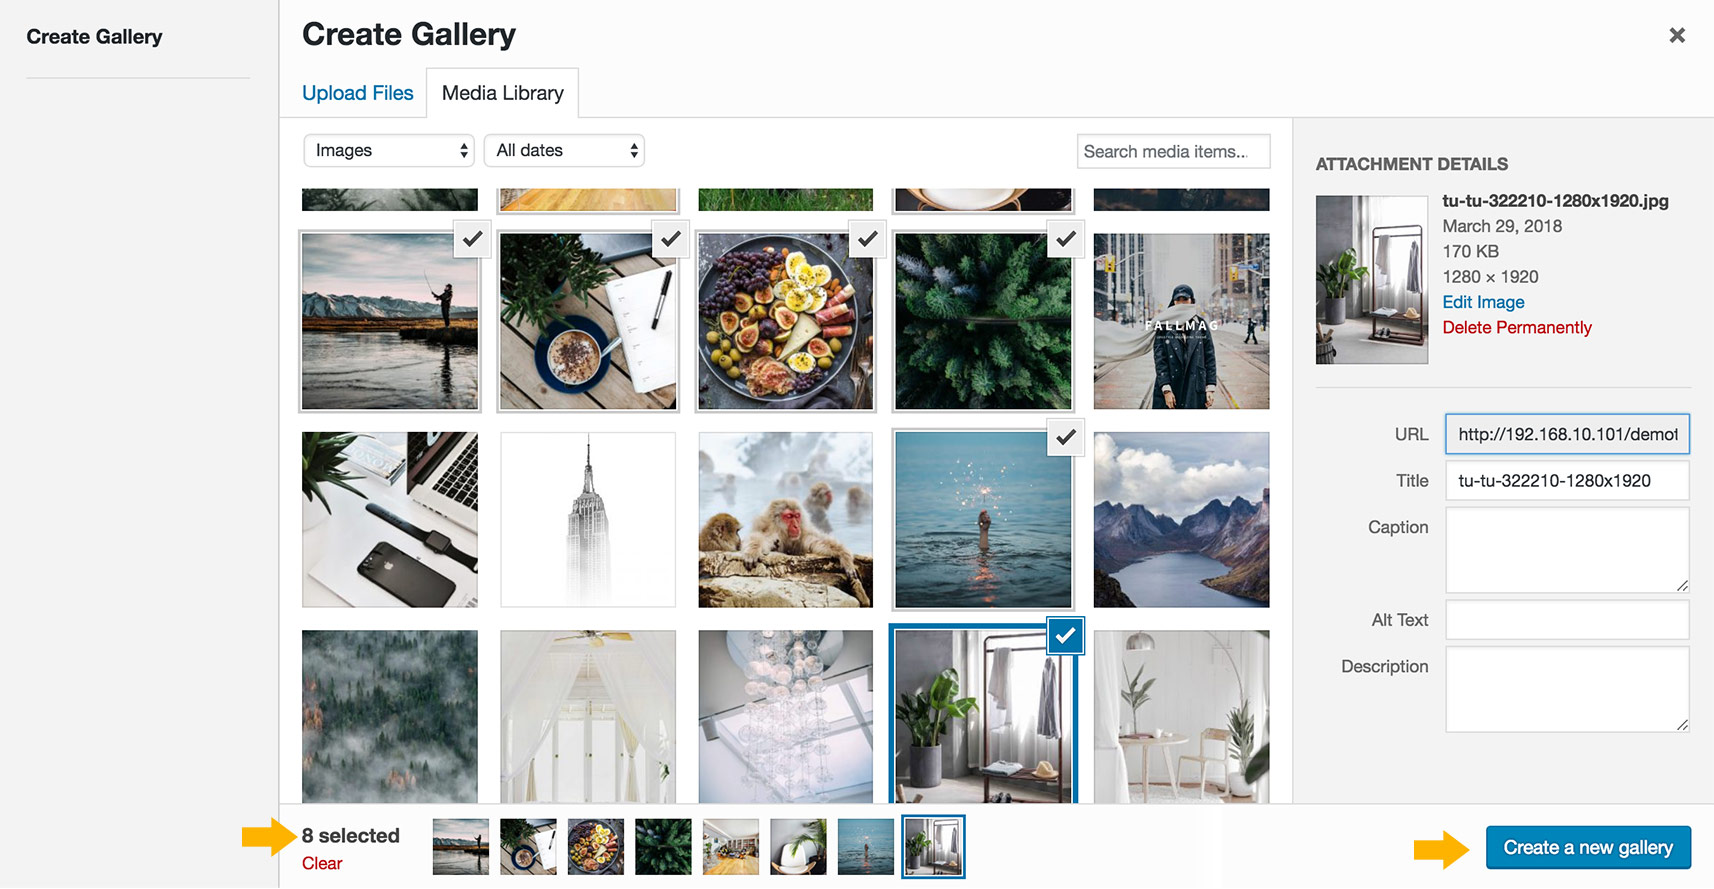 Select some images to create a gallery